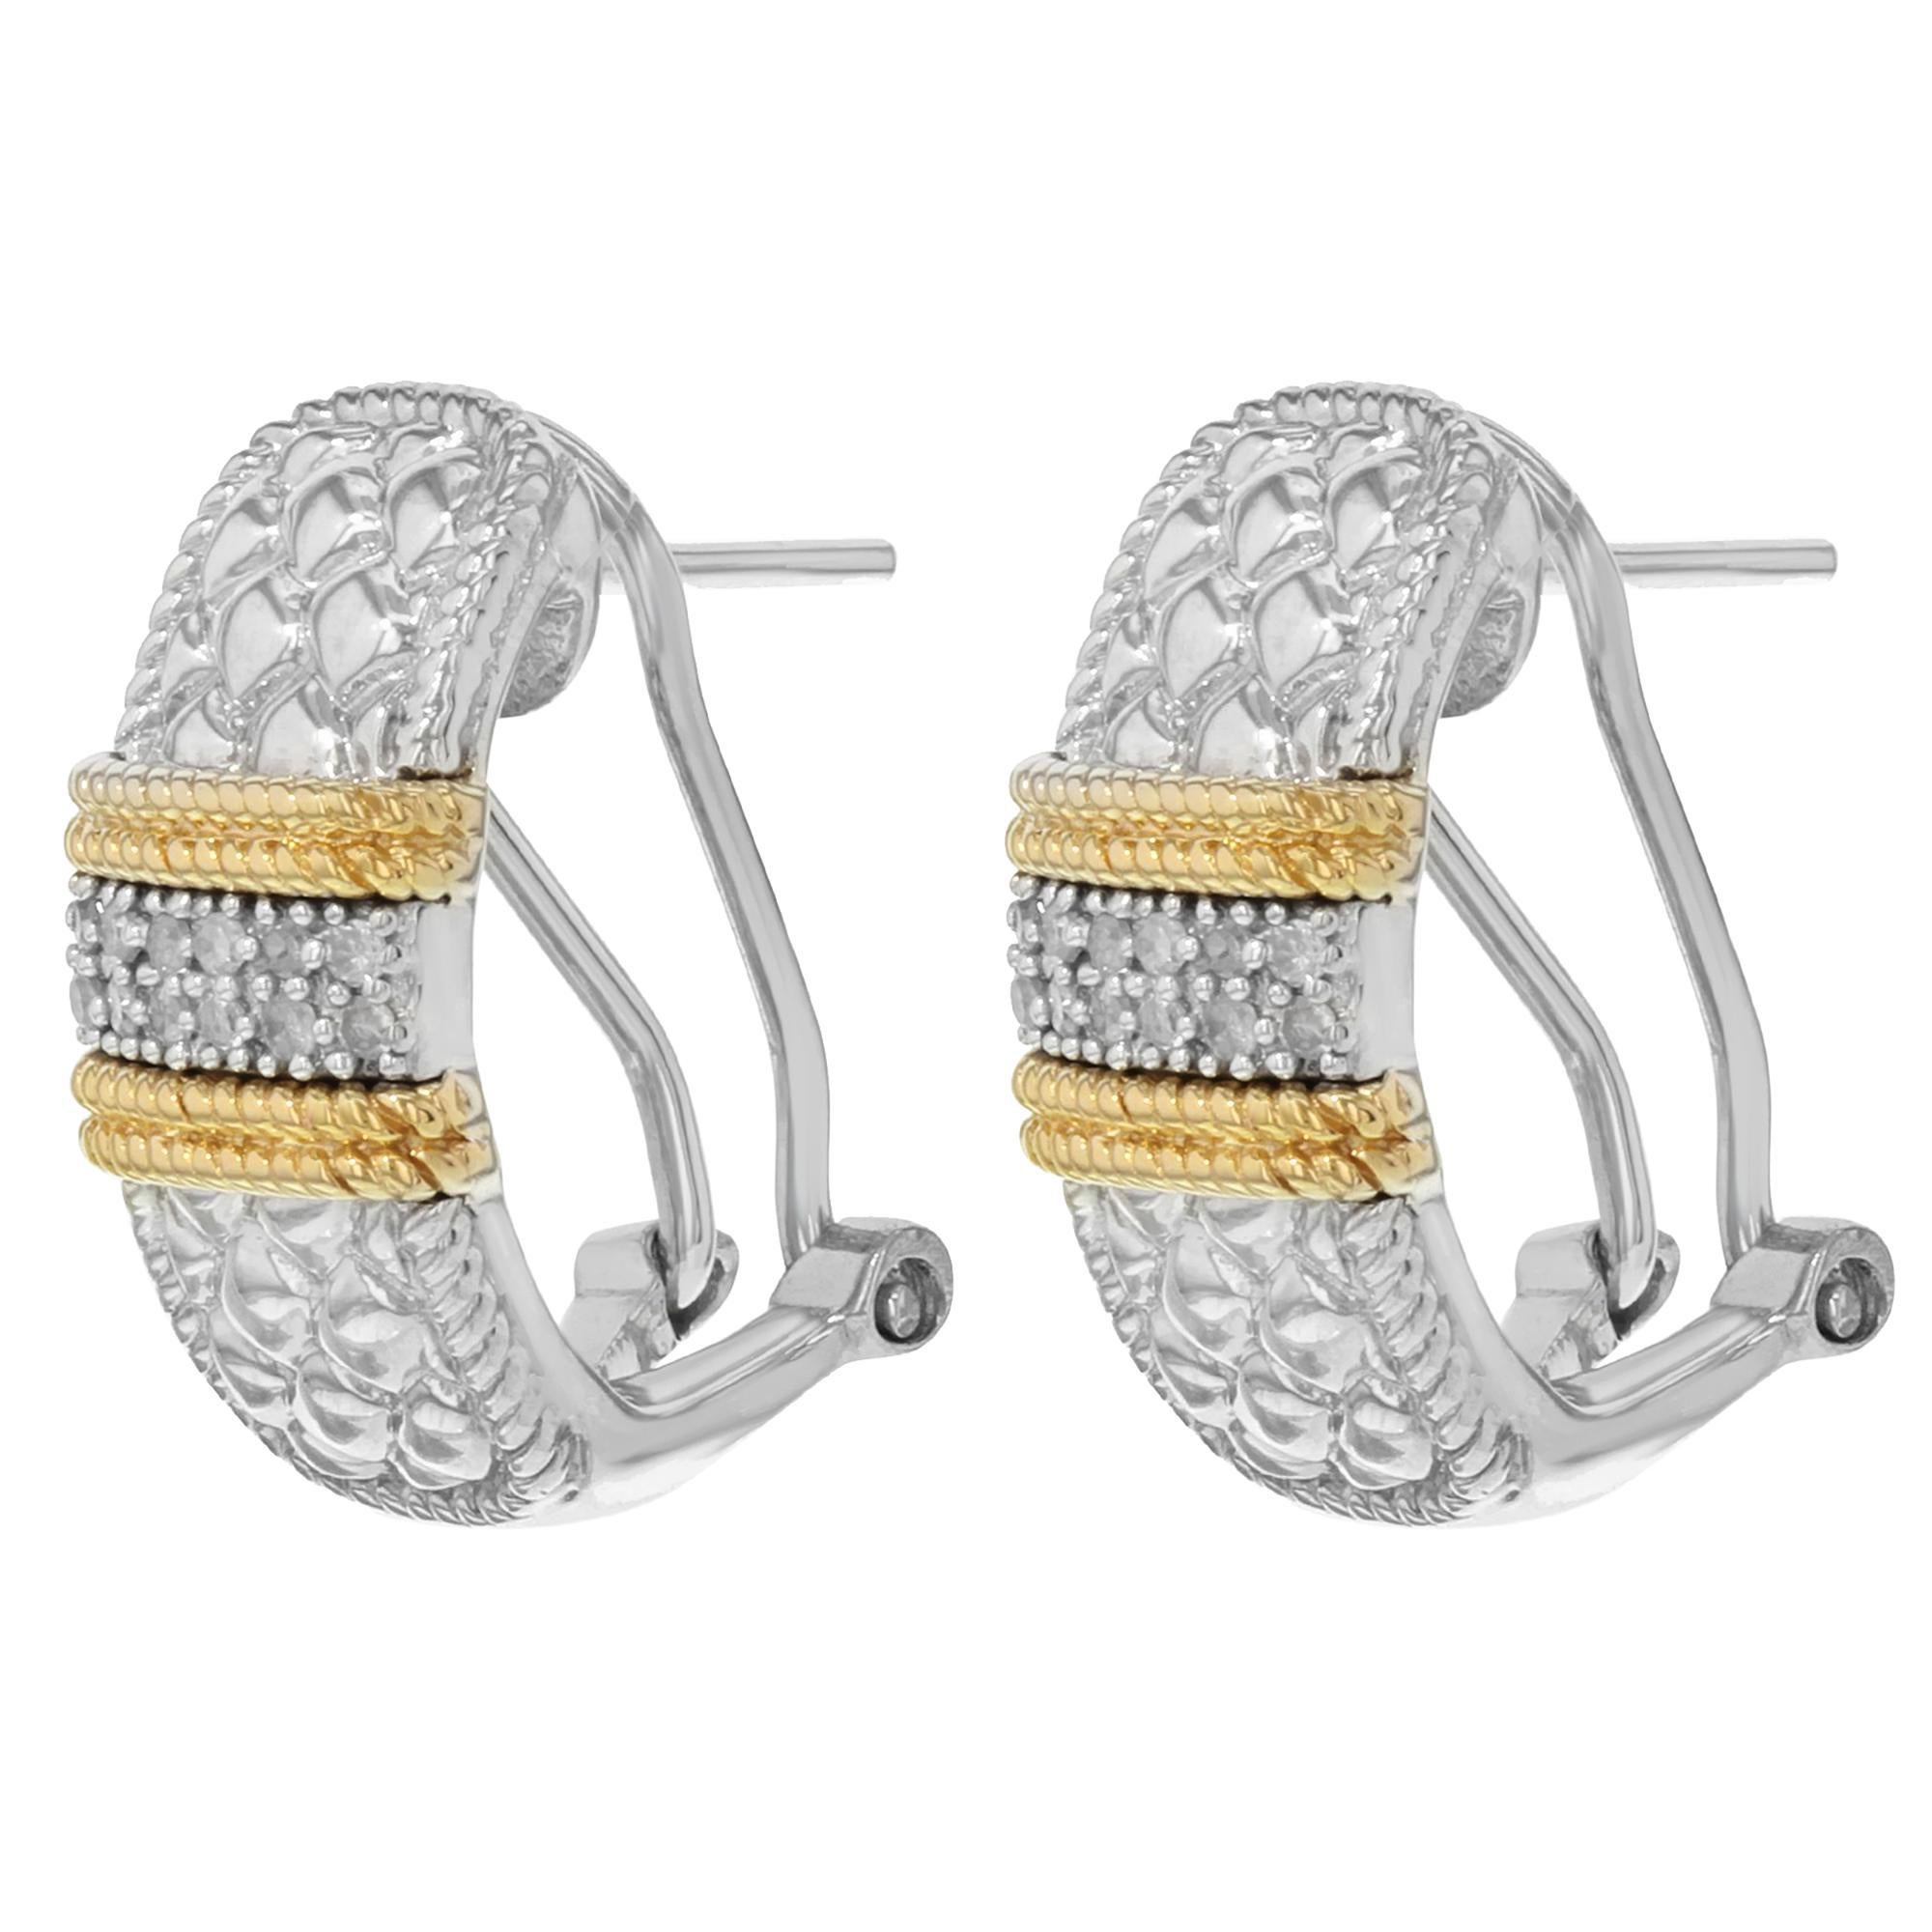 Round Cut Diamond Ladies Huggies Earrings 14k White & Yellow Gold 0.03cttw In New Condition For Sale In New York, NY